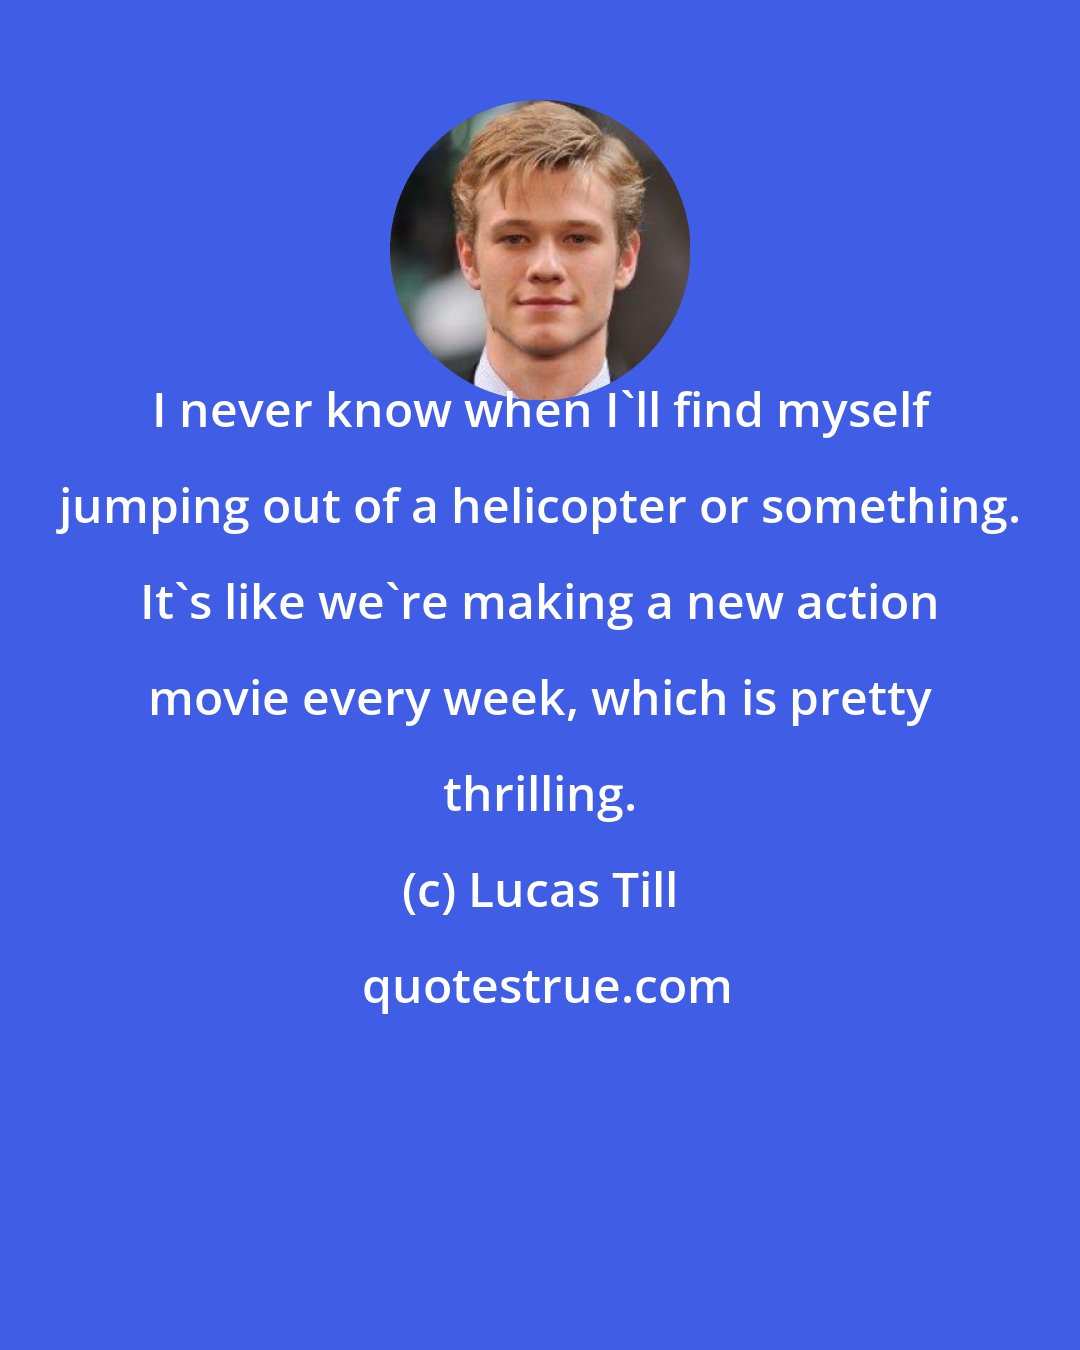 Lucas Till: I never know when I'll find myself jumping out of a helicopter or something. It's like we're making a new action movie every week, which is pretty thrilling.